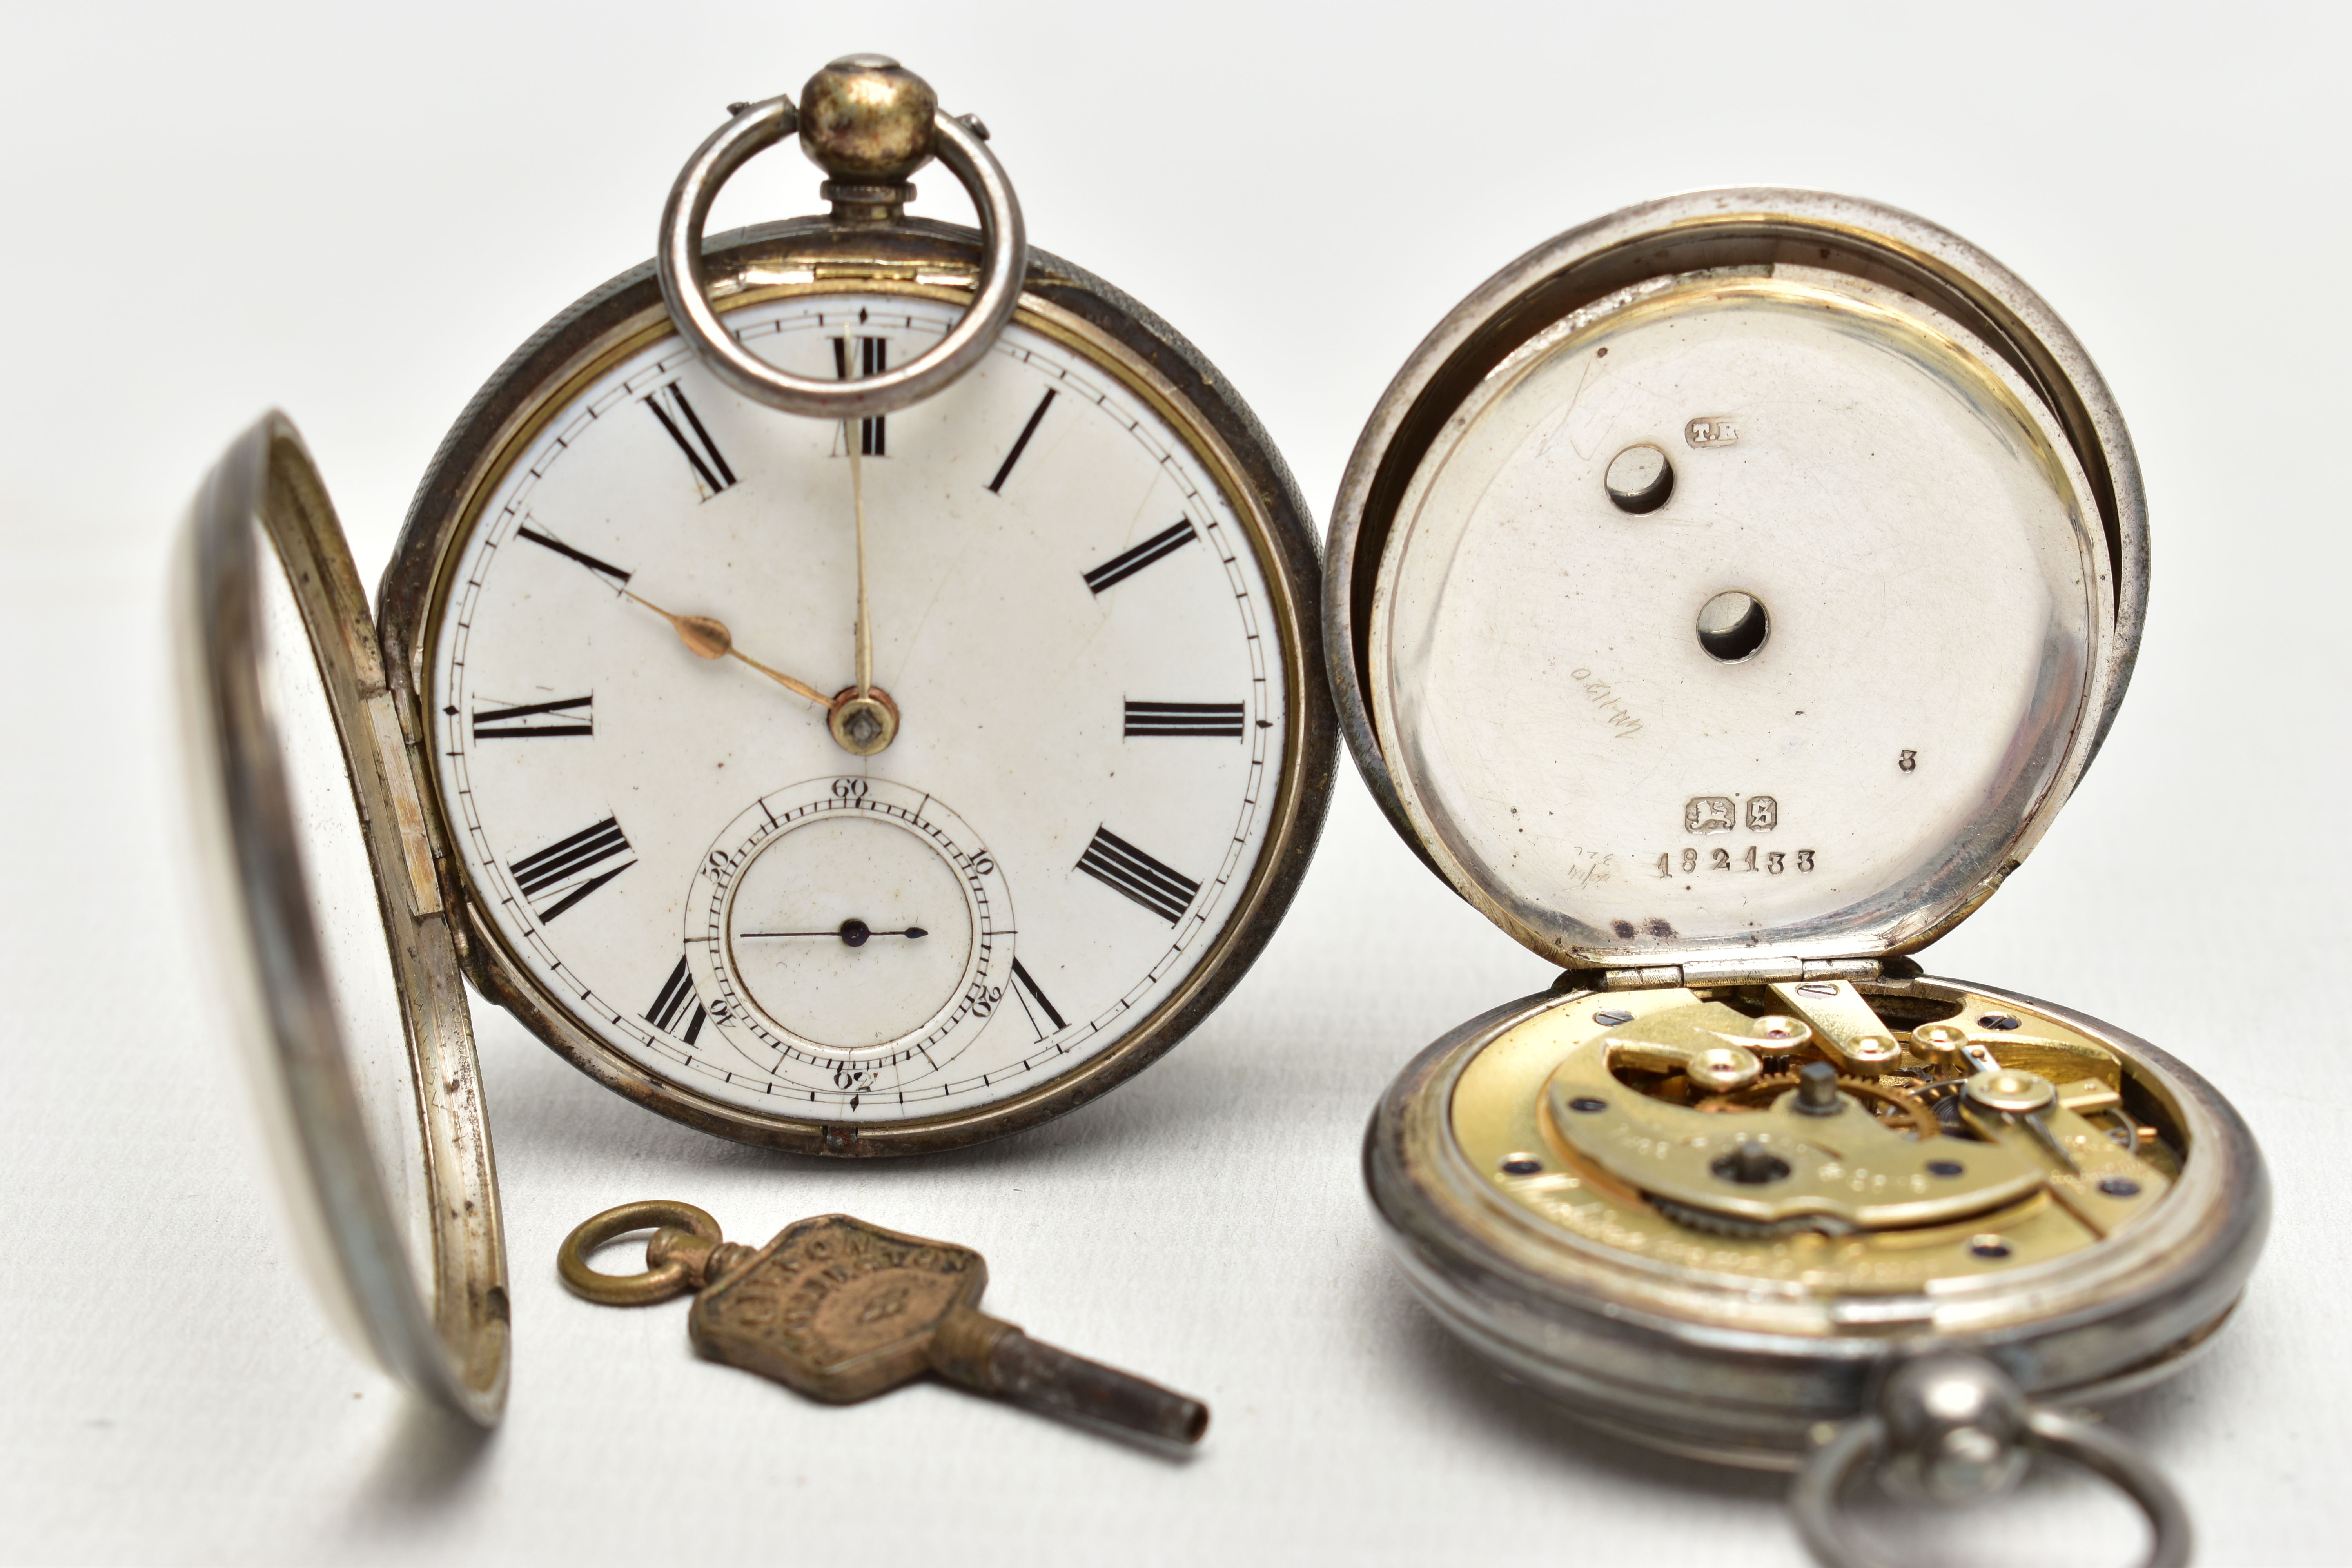 TWO OPEN FACE POCKET WATCHES AND WATCH KEY, the first a silver open face pocket watch, key wound, - Image 4 of 6